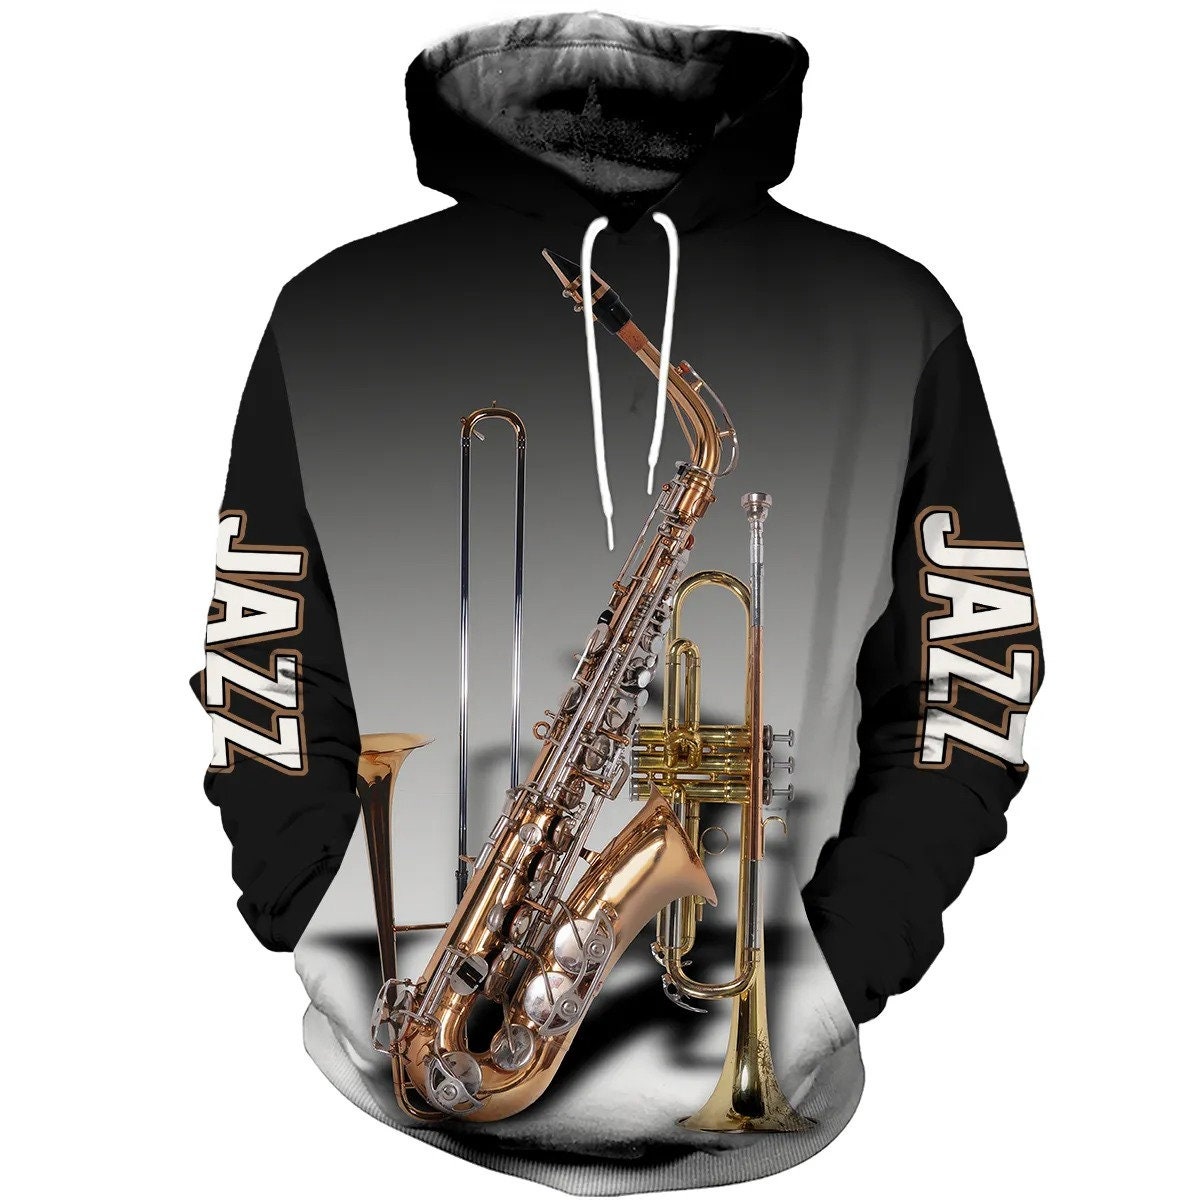 3D All Over Printed Jazz Musical Instruments AOP Unisex Hoodie